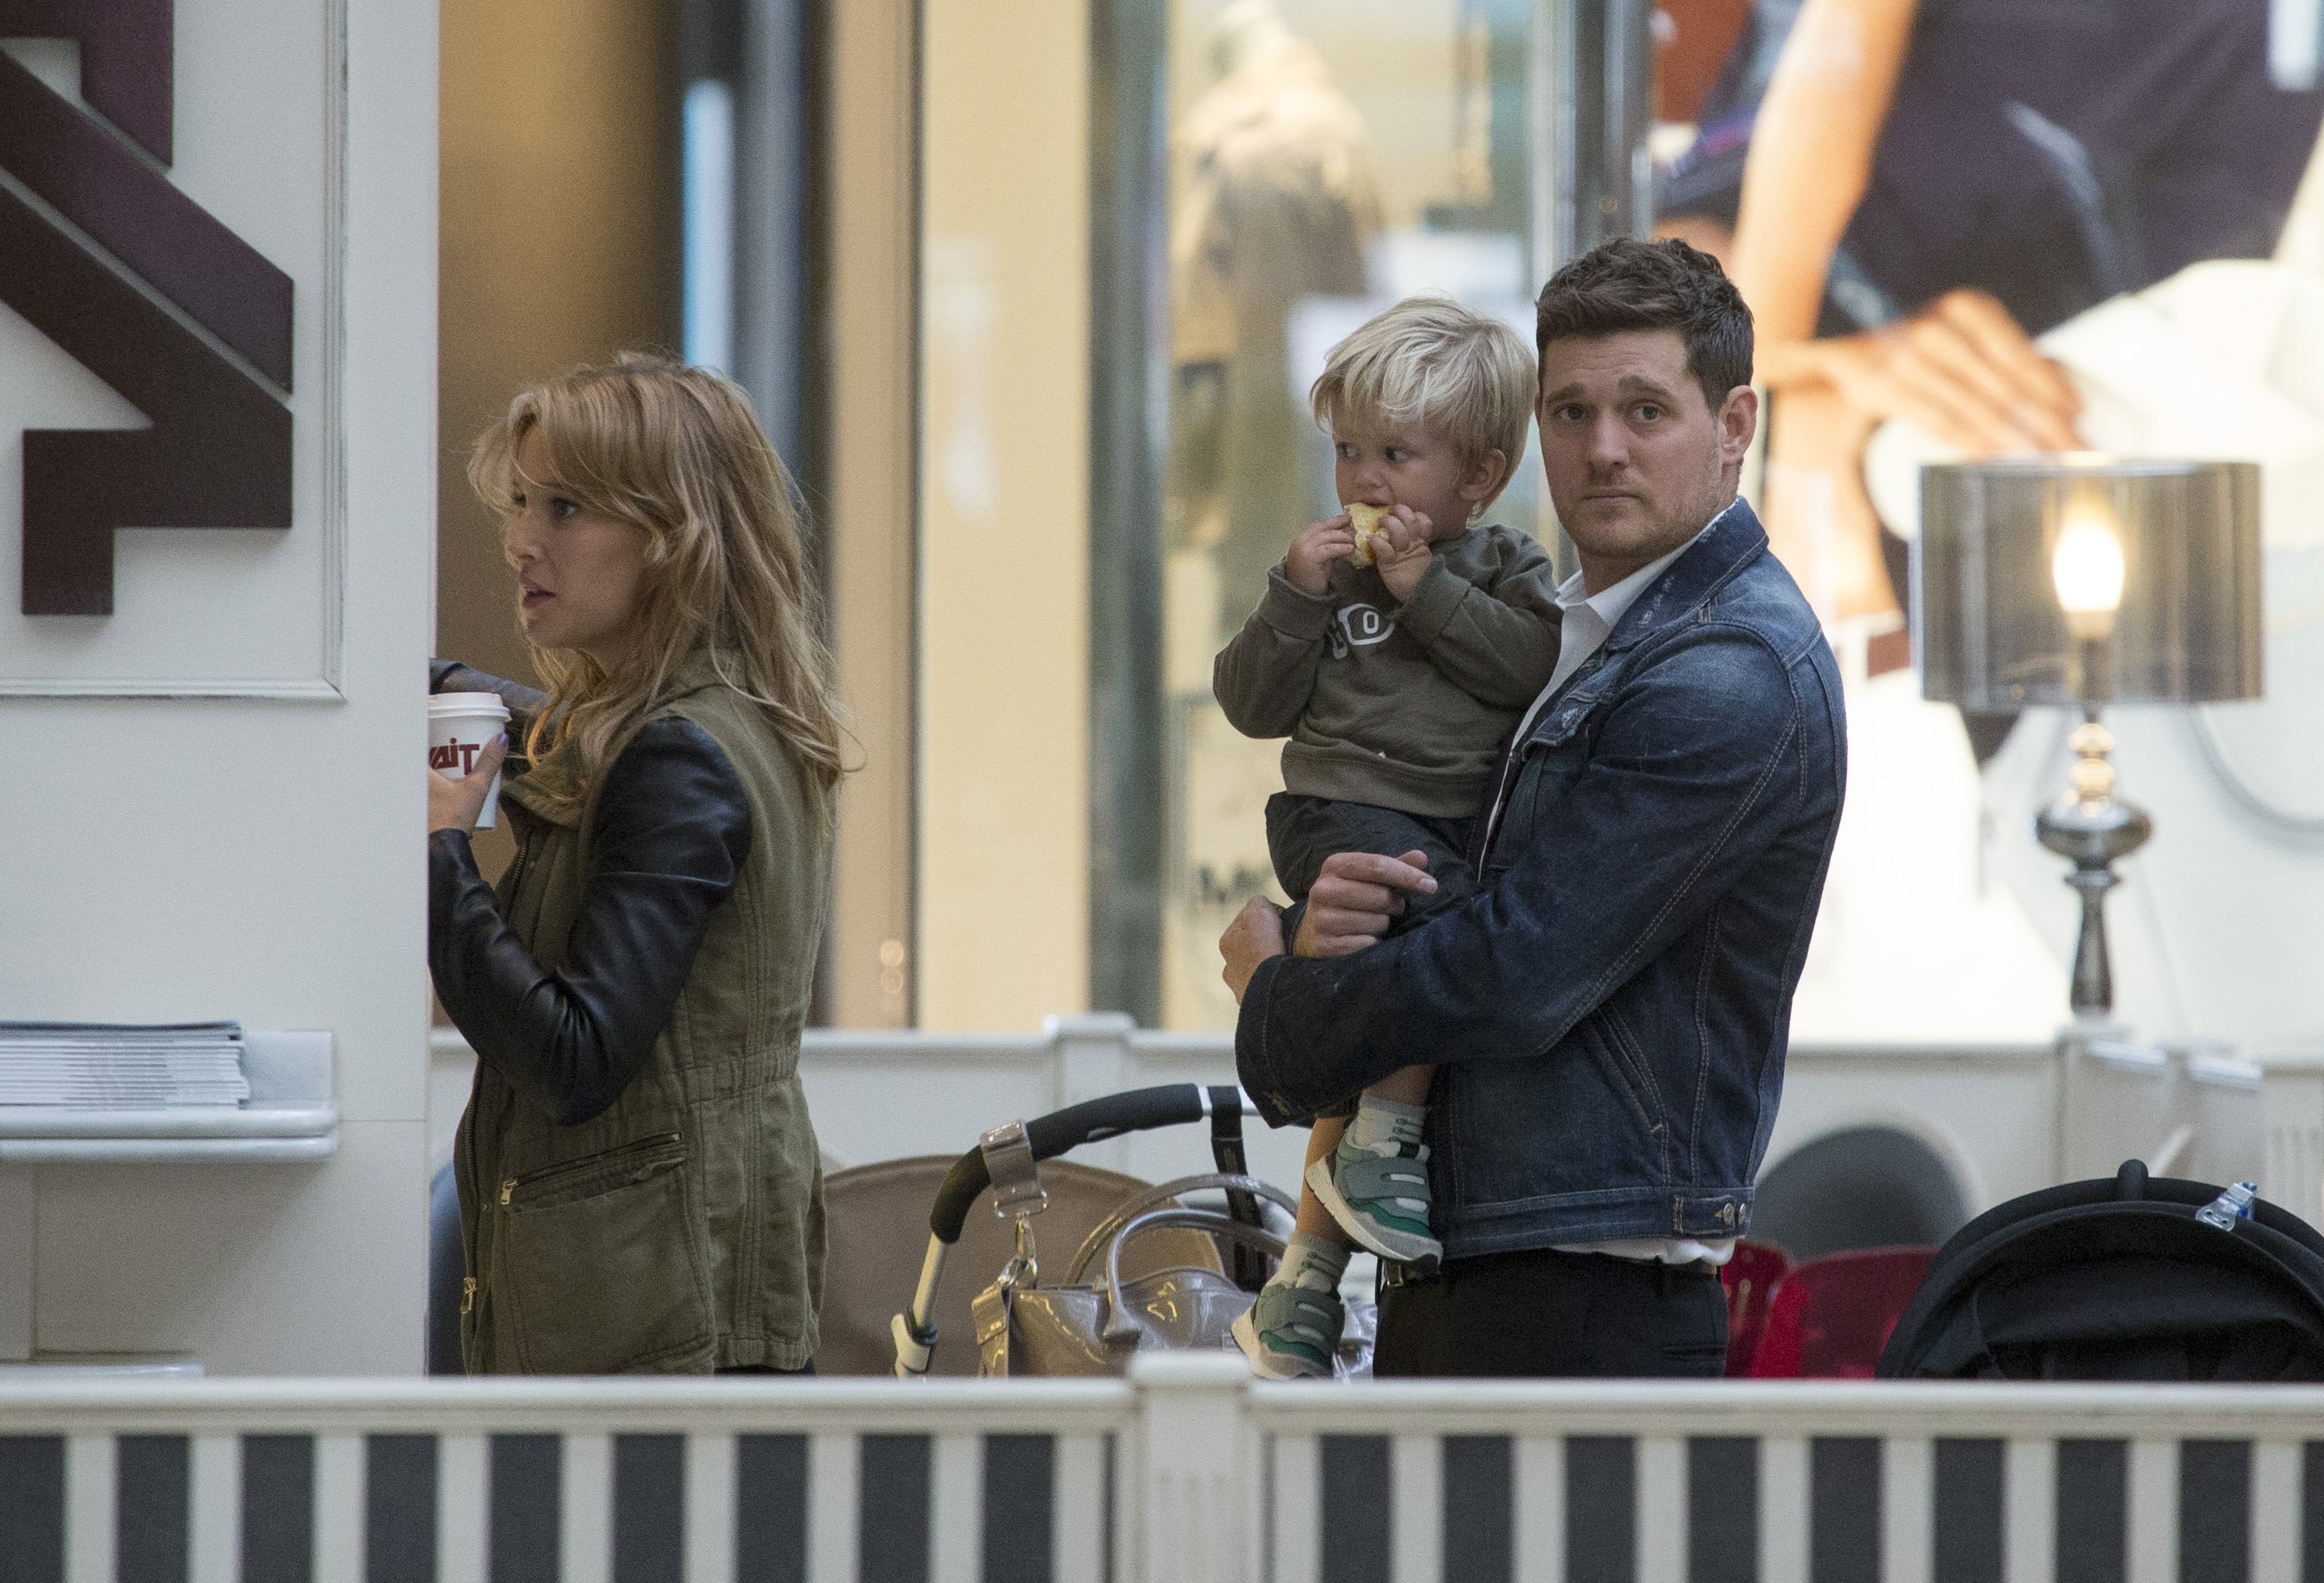 Luisana Lopilato and Michael Buble seen on an outing with their son Noah on April 28, 2015, in Madrid, Spain. | Source: Iconic/GC Images/Getty Images